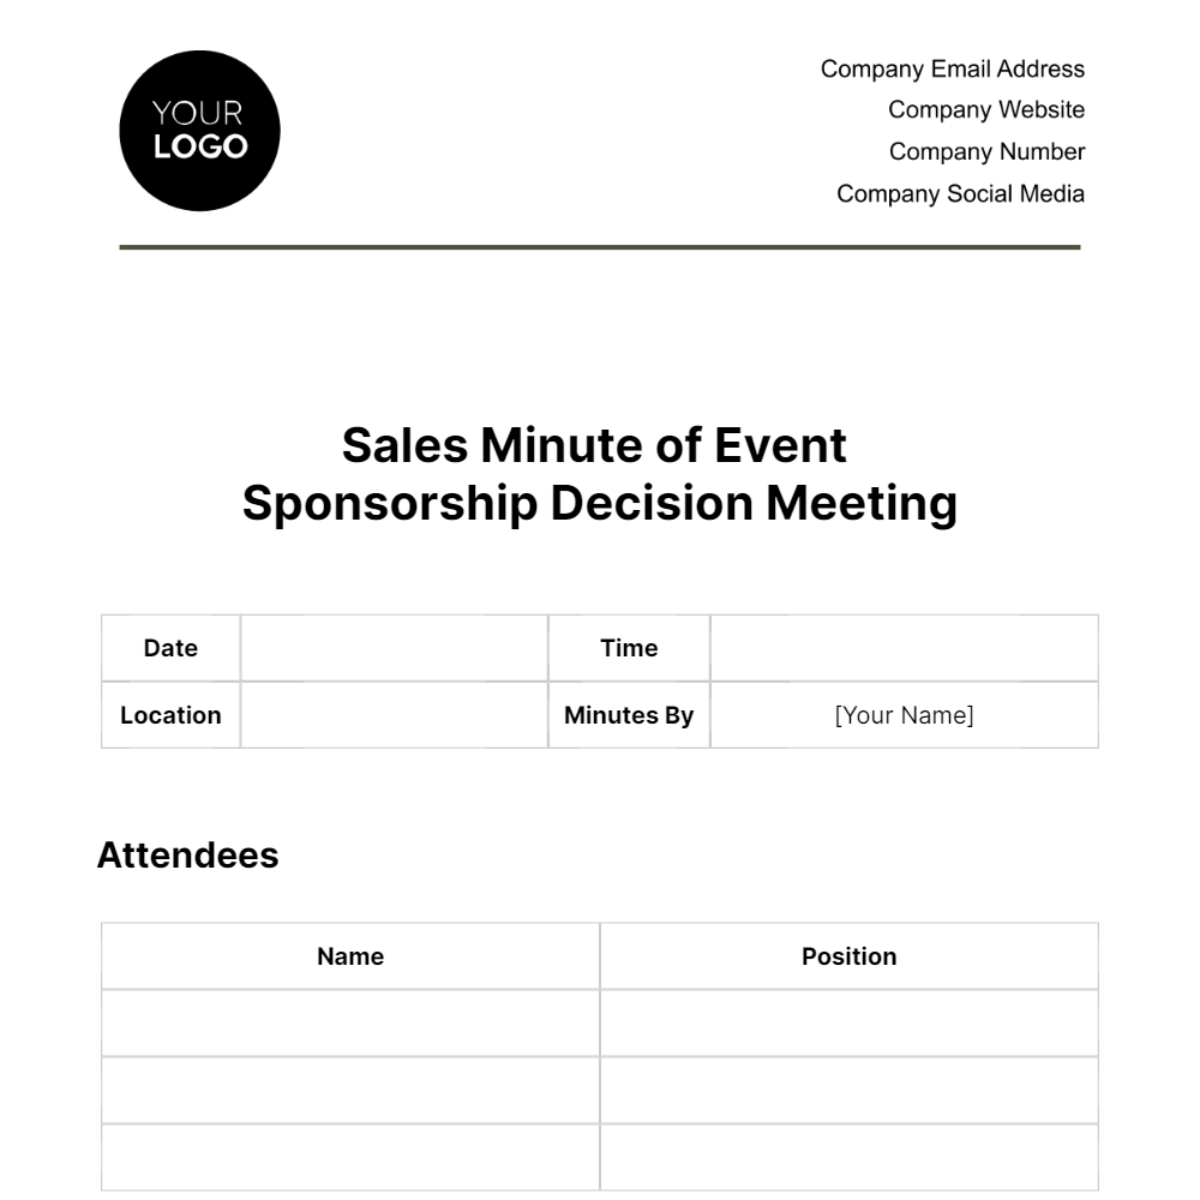 Free Sales Minute of Event Sponsorship Decision Meeting Template